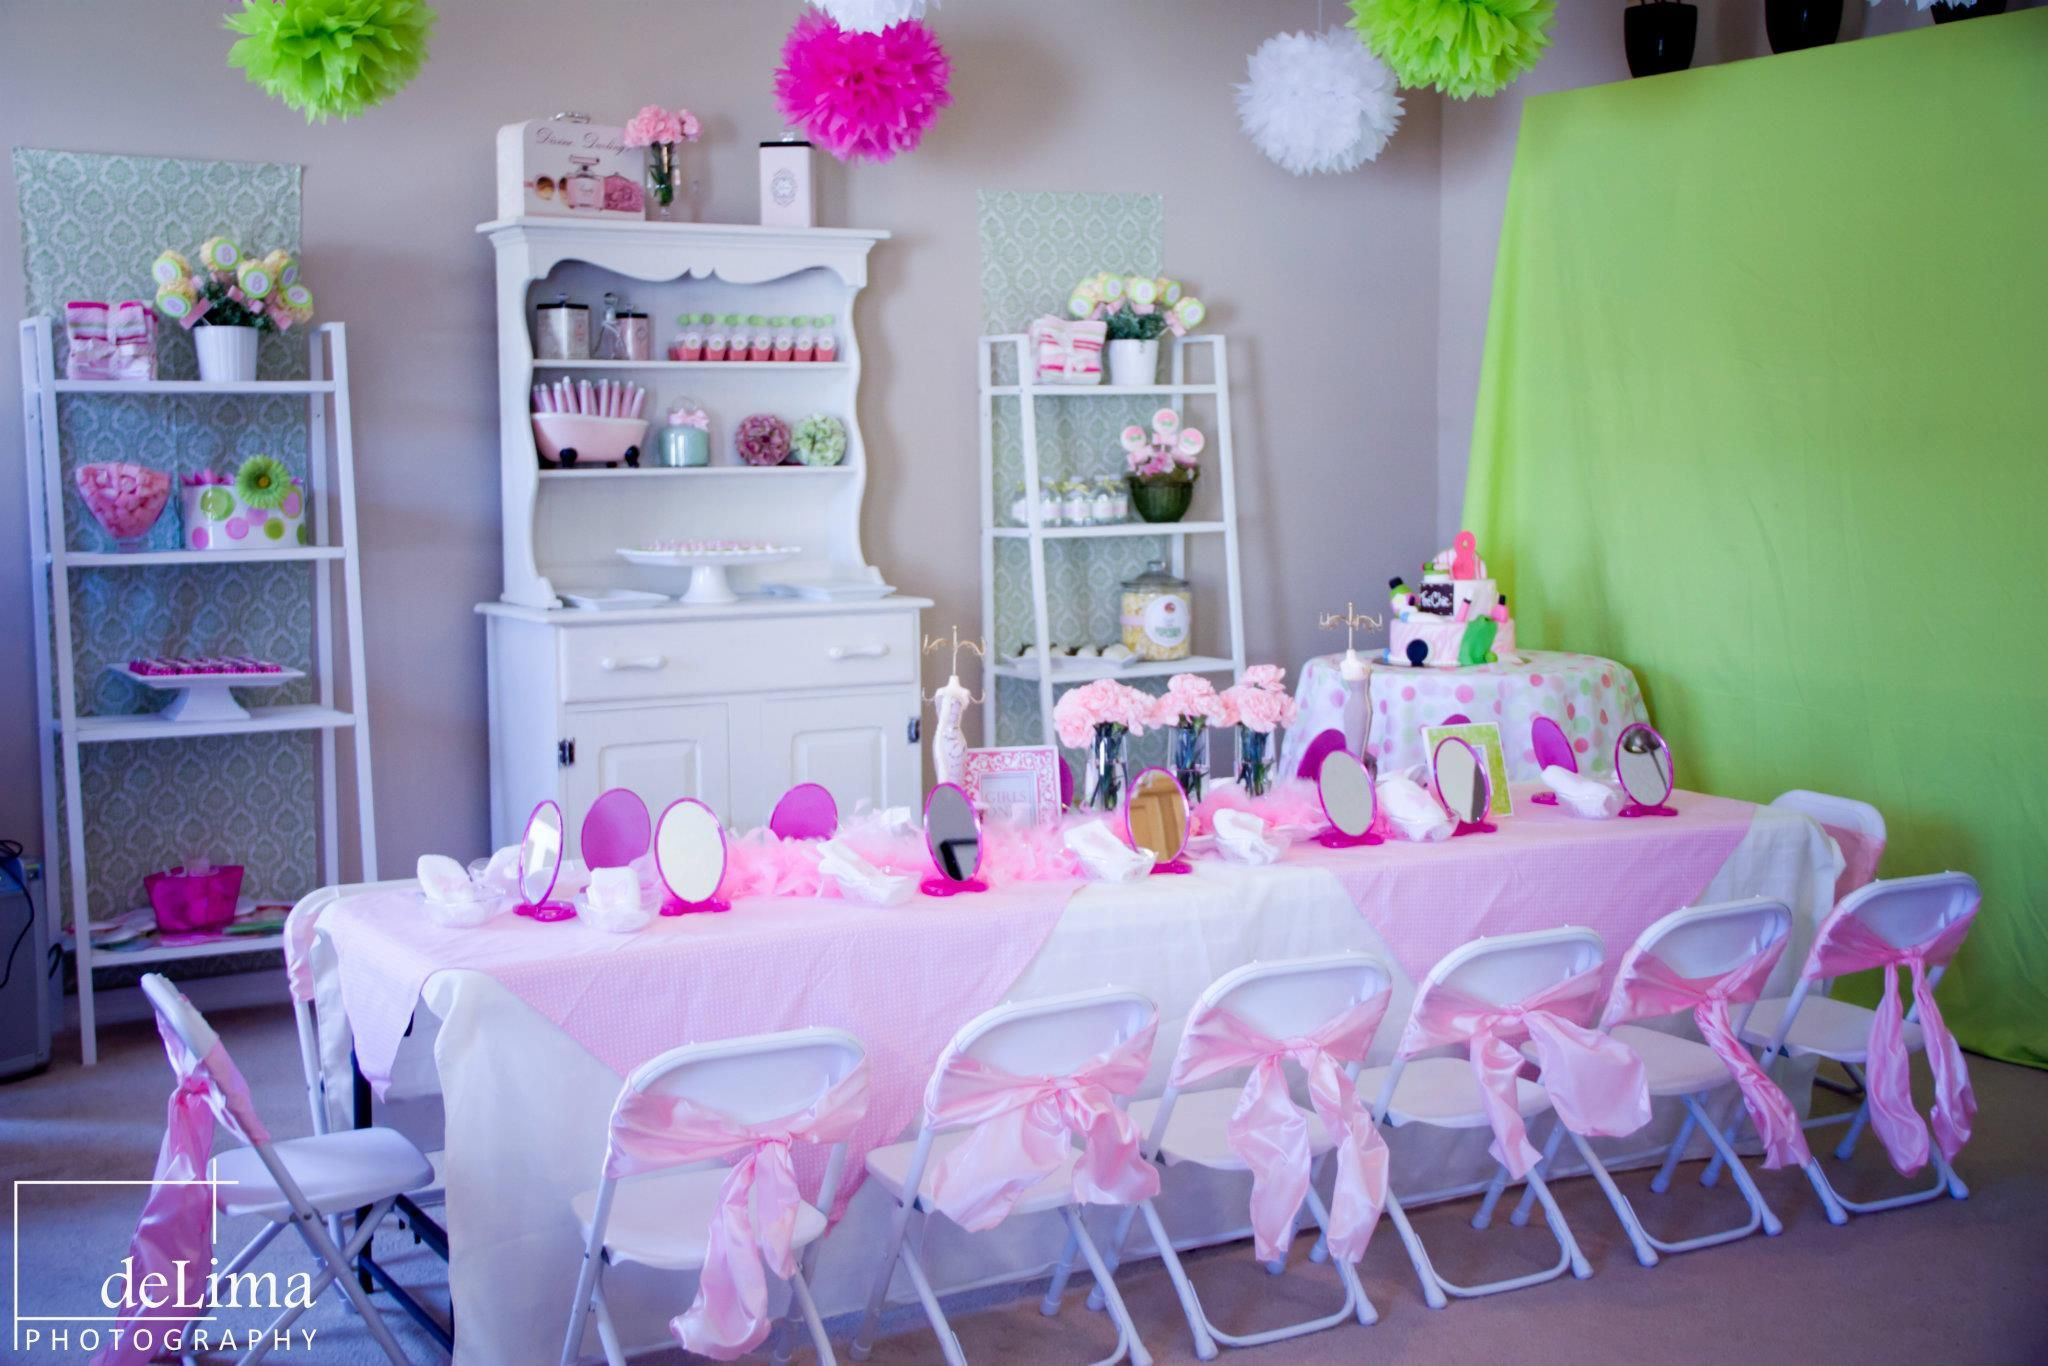 Spa Party Ideas For Kids
 Super Chic Spa Party CRAFTS